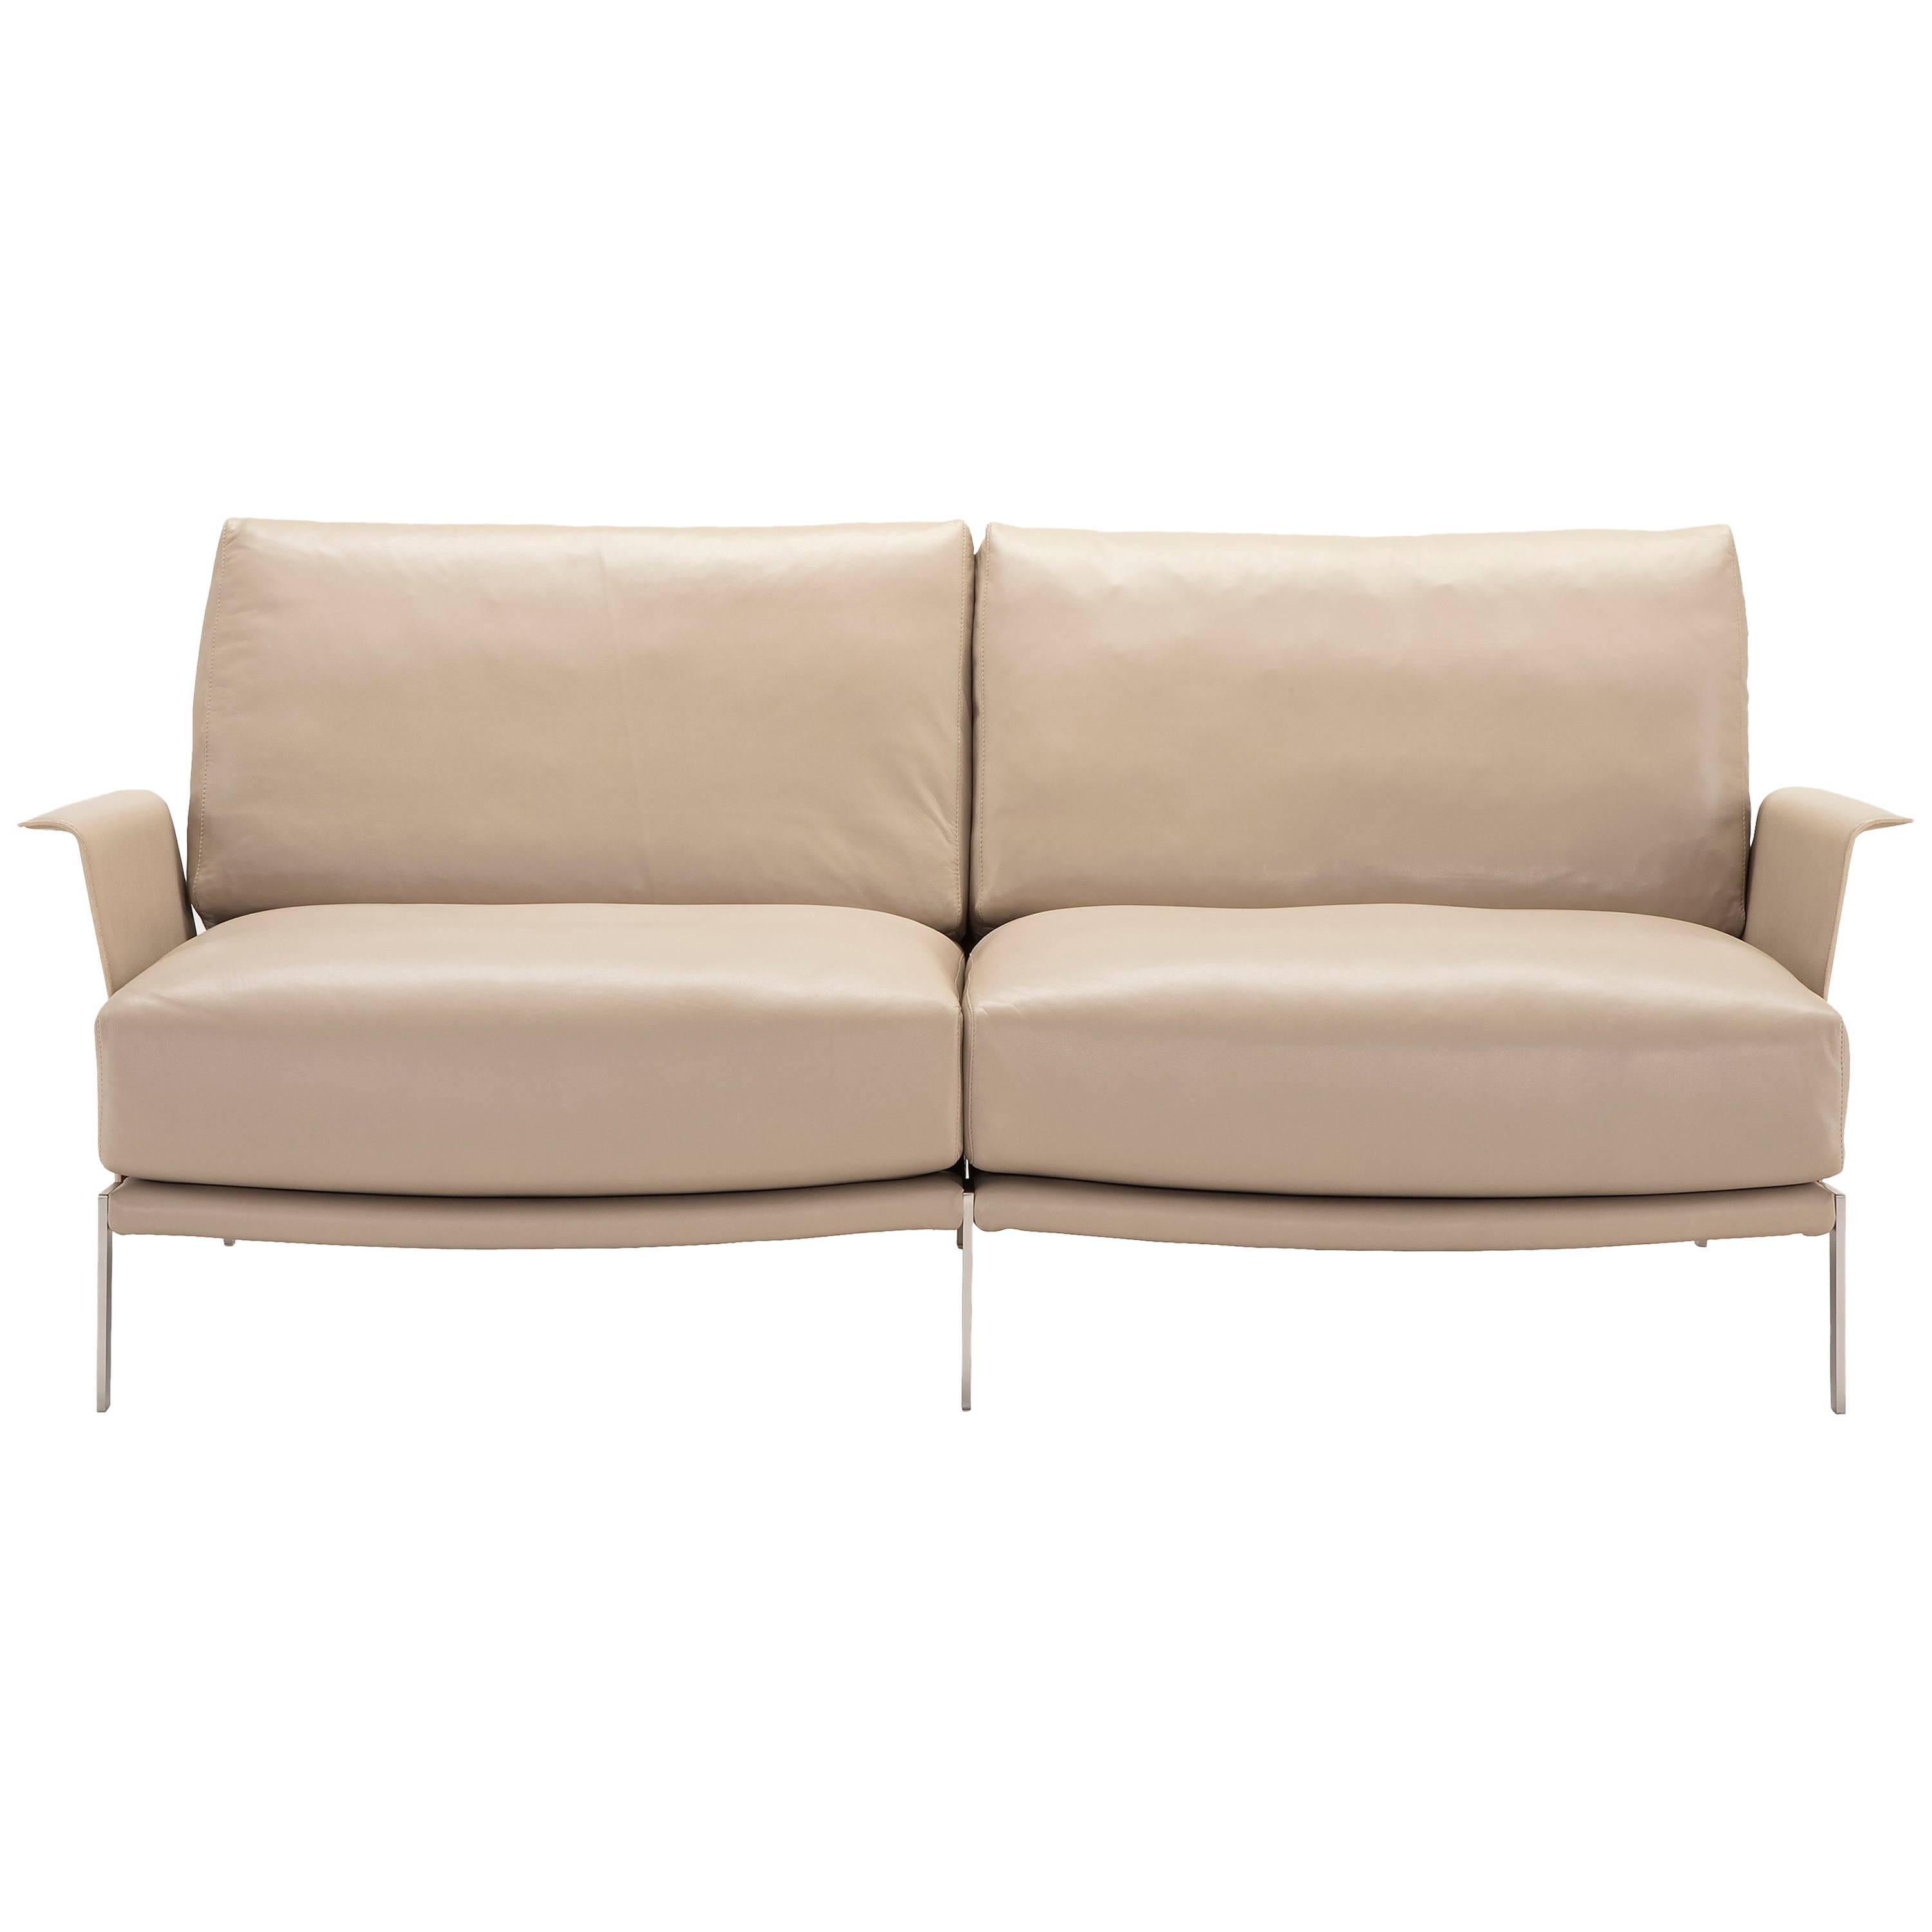 Link Sofa in Beige by Maurizio Marconato & Terry Zappa For Sale